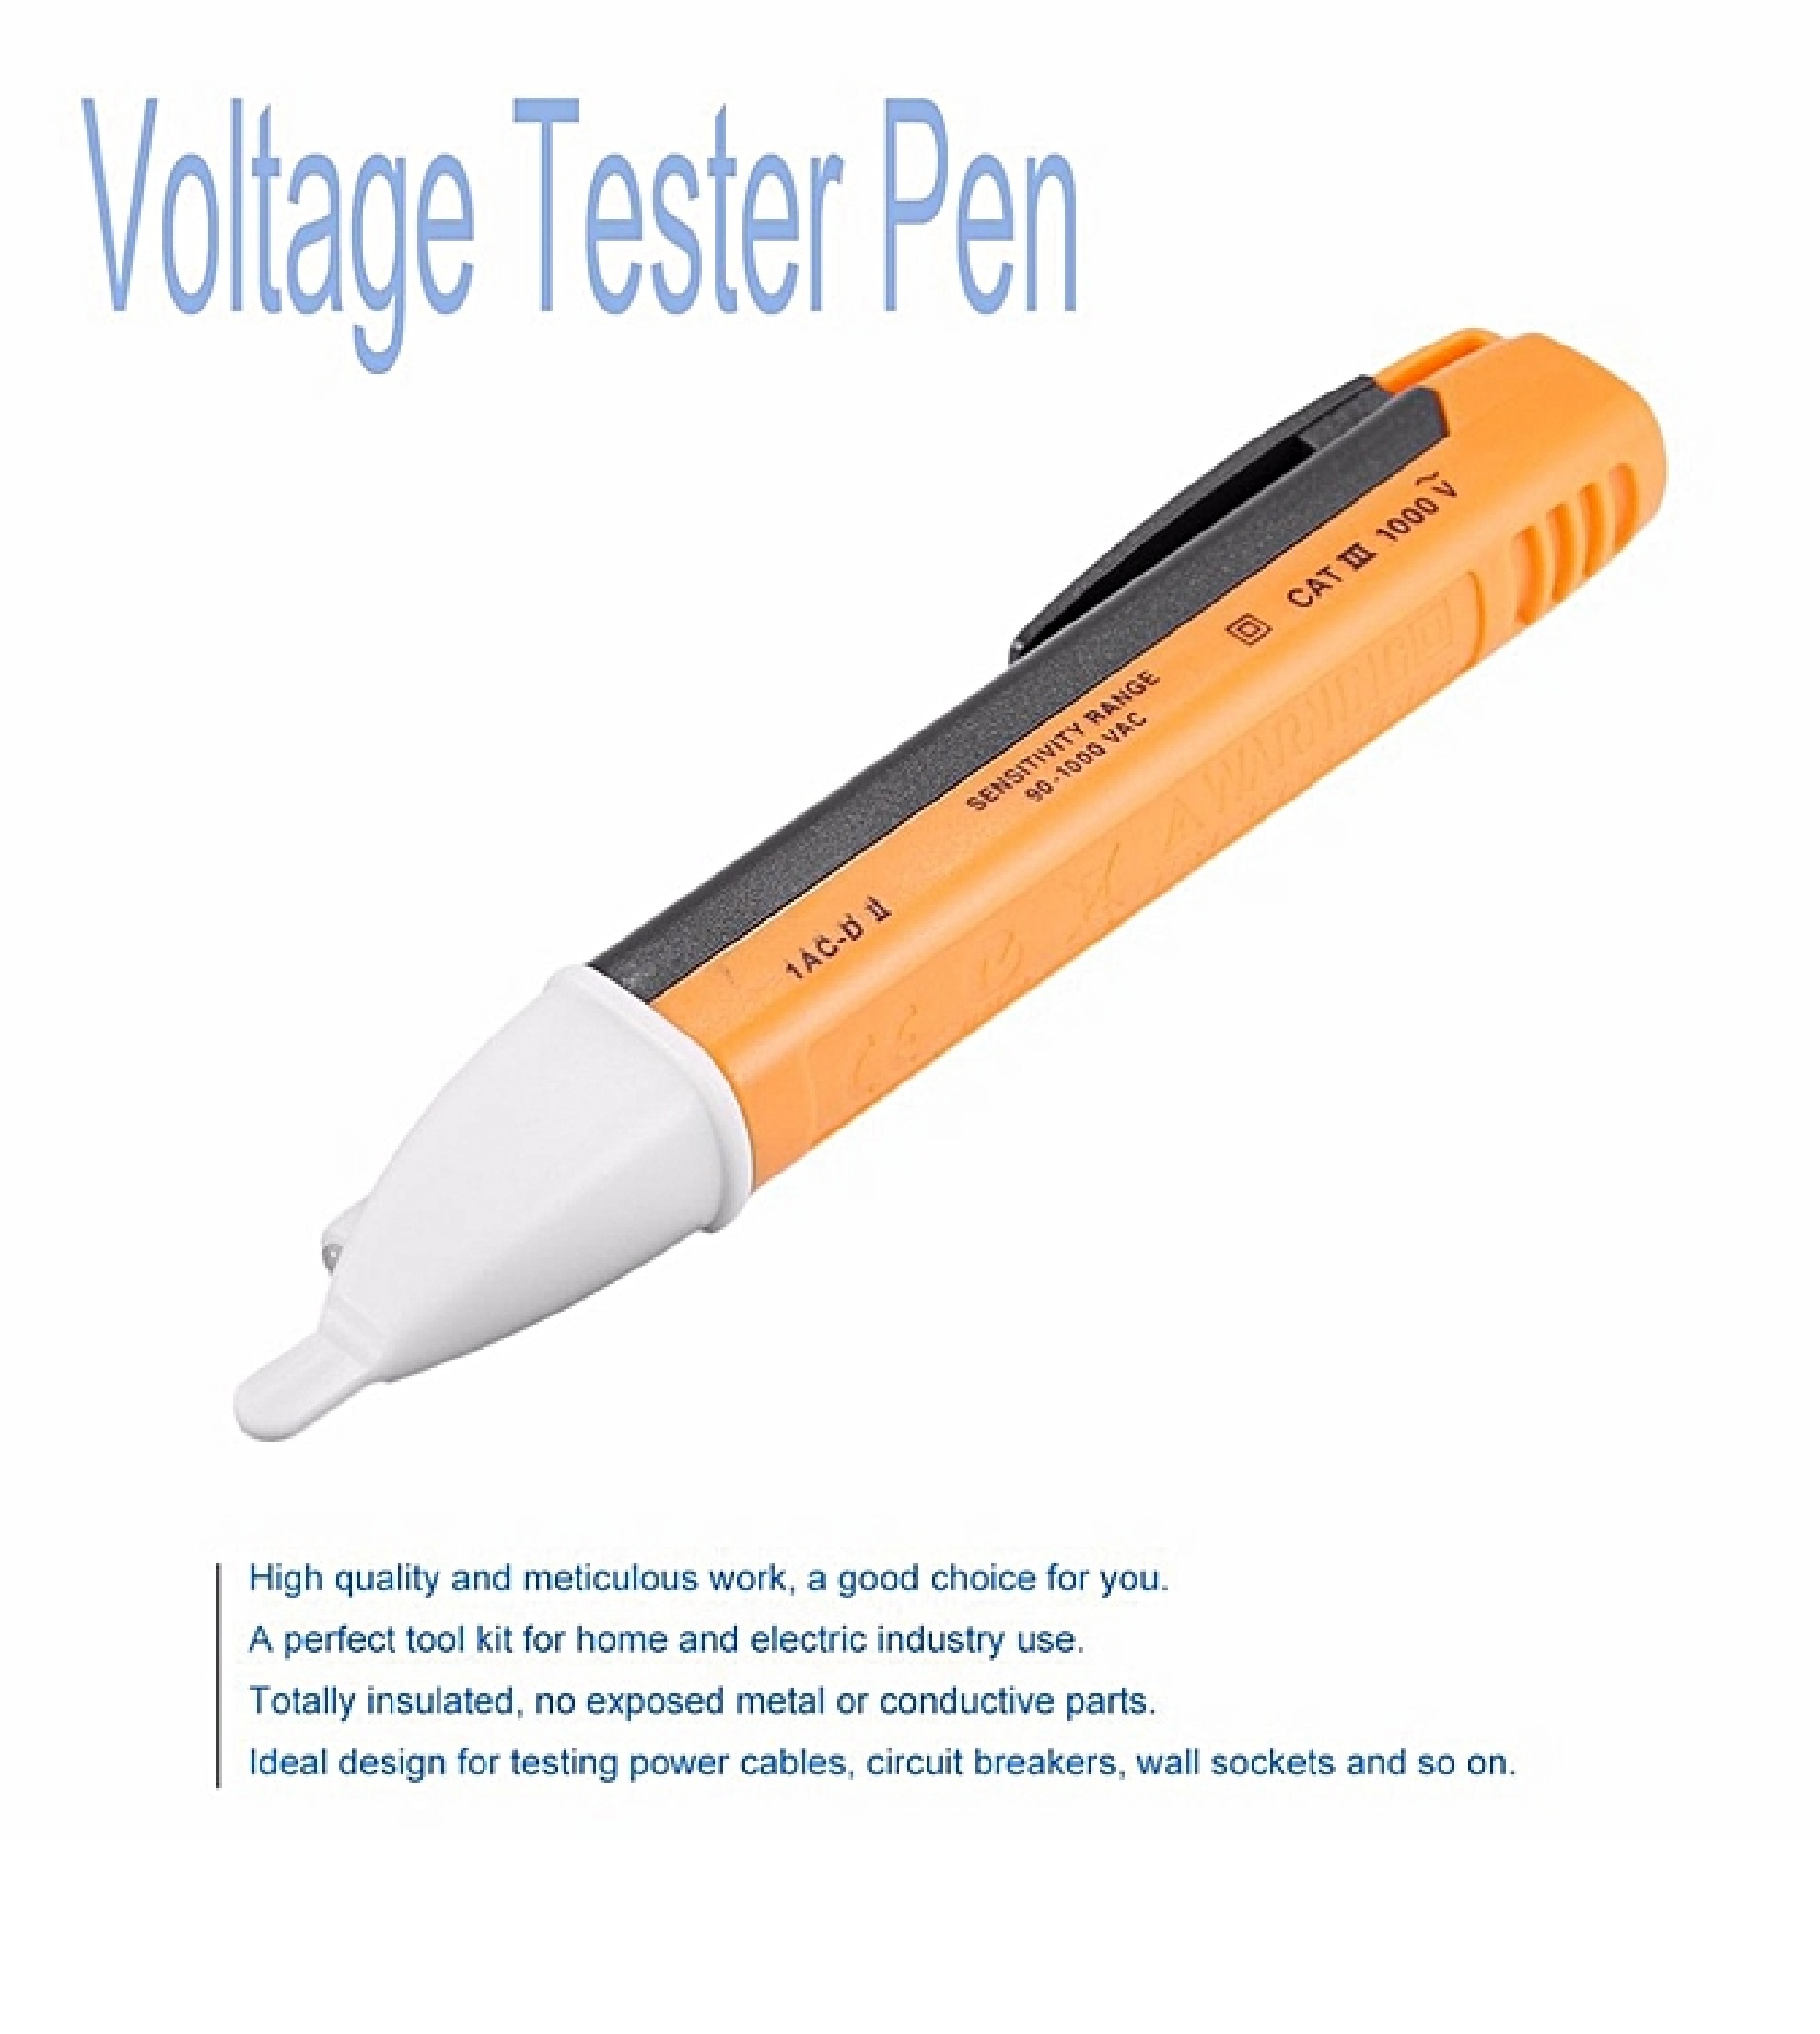 Non Contact Electricity Voltage Tester, Best Quality Power Tester Pen Use For High and Low Voltage